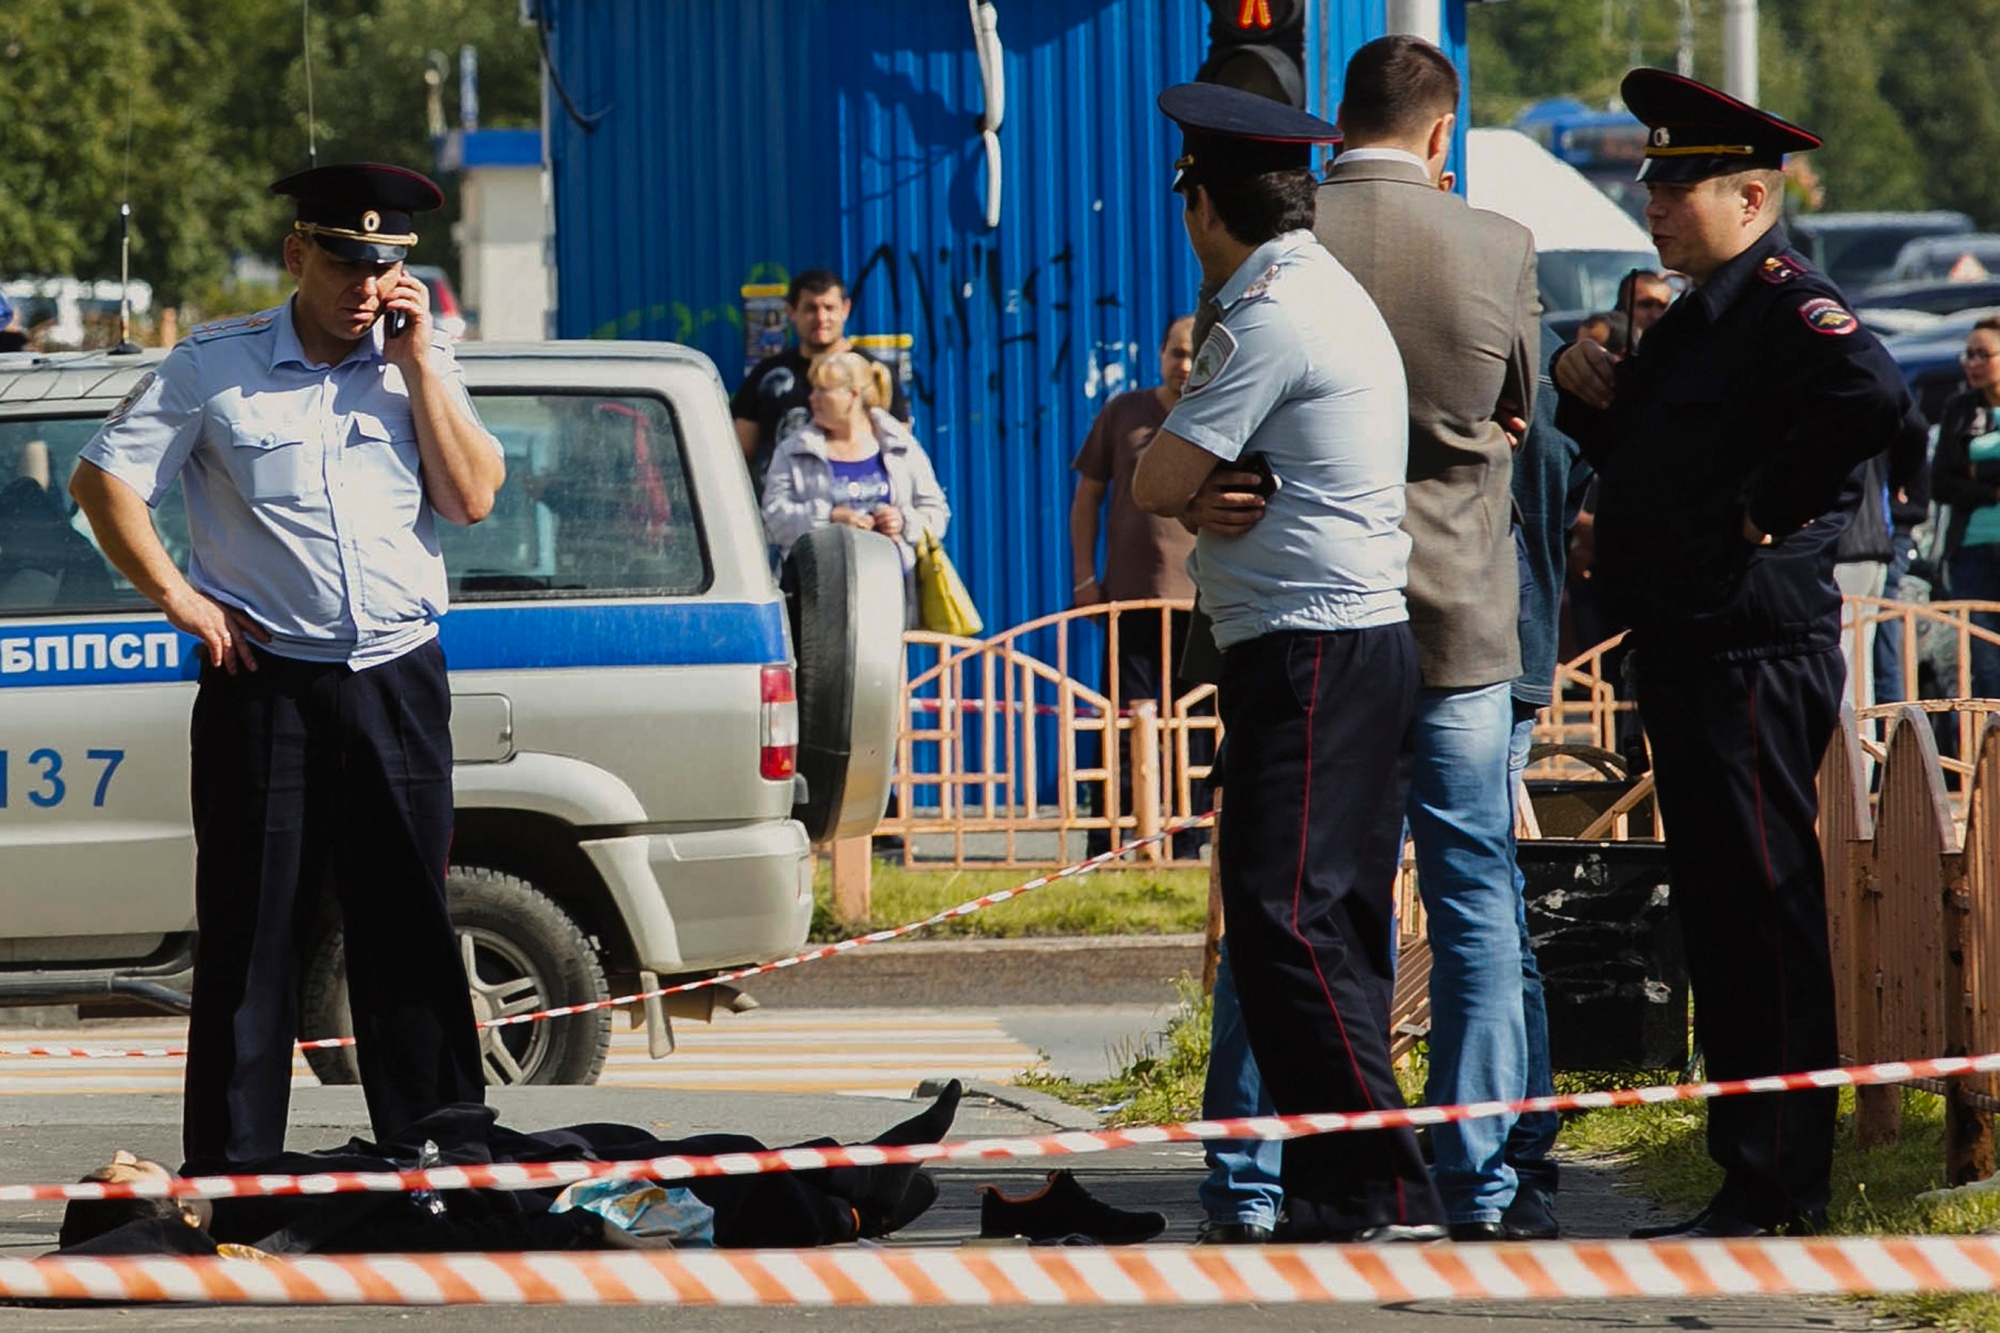 Police officers stand by the body of a man who was killed after an alleged stabbing attack, in the Siberian city of Surgut, Russia, Saturday, Aug. 19, 2017. A knife-wielding man went on a stabbing rampage in a Siberian city on Saturday, wounding seven people before police shot and killed him. (Irina Shvets/Siapress.ru via AP) Russia Attack